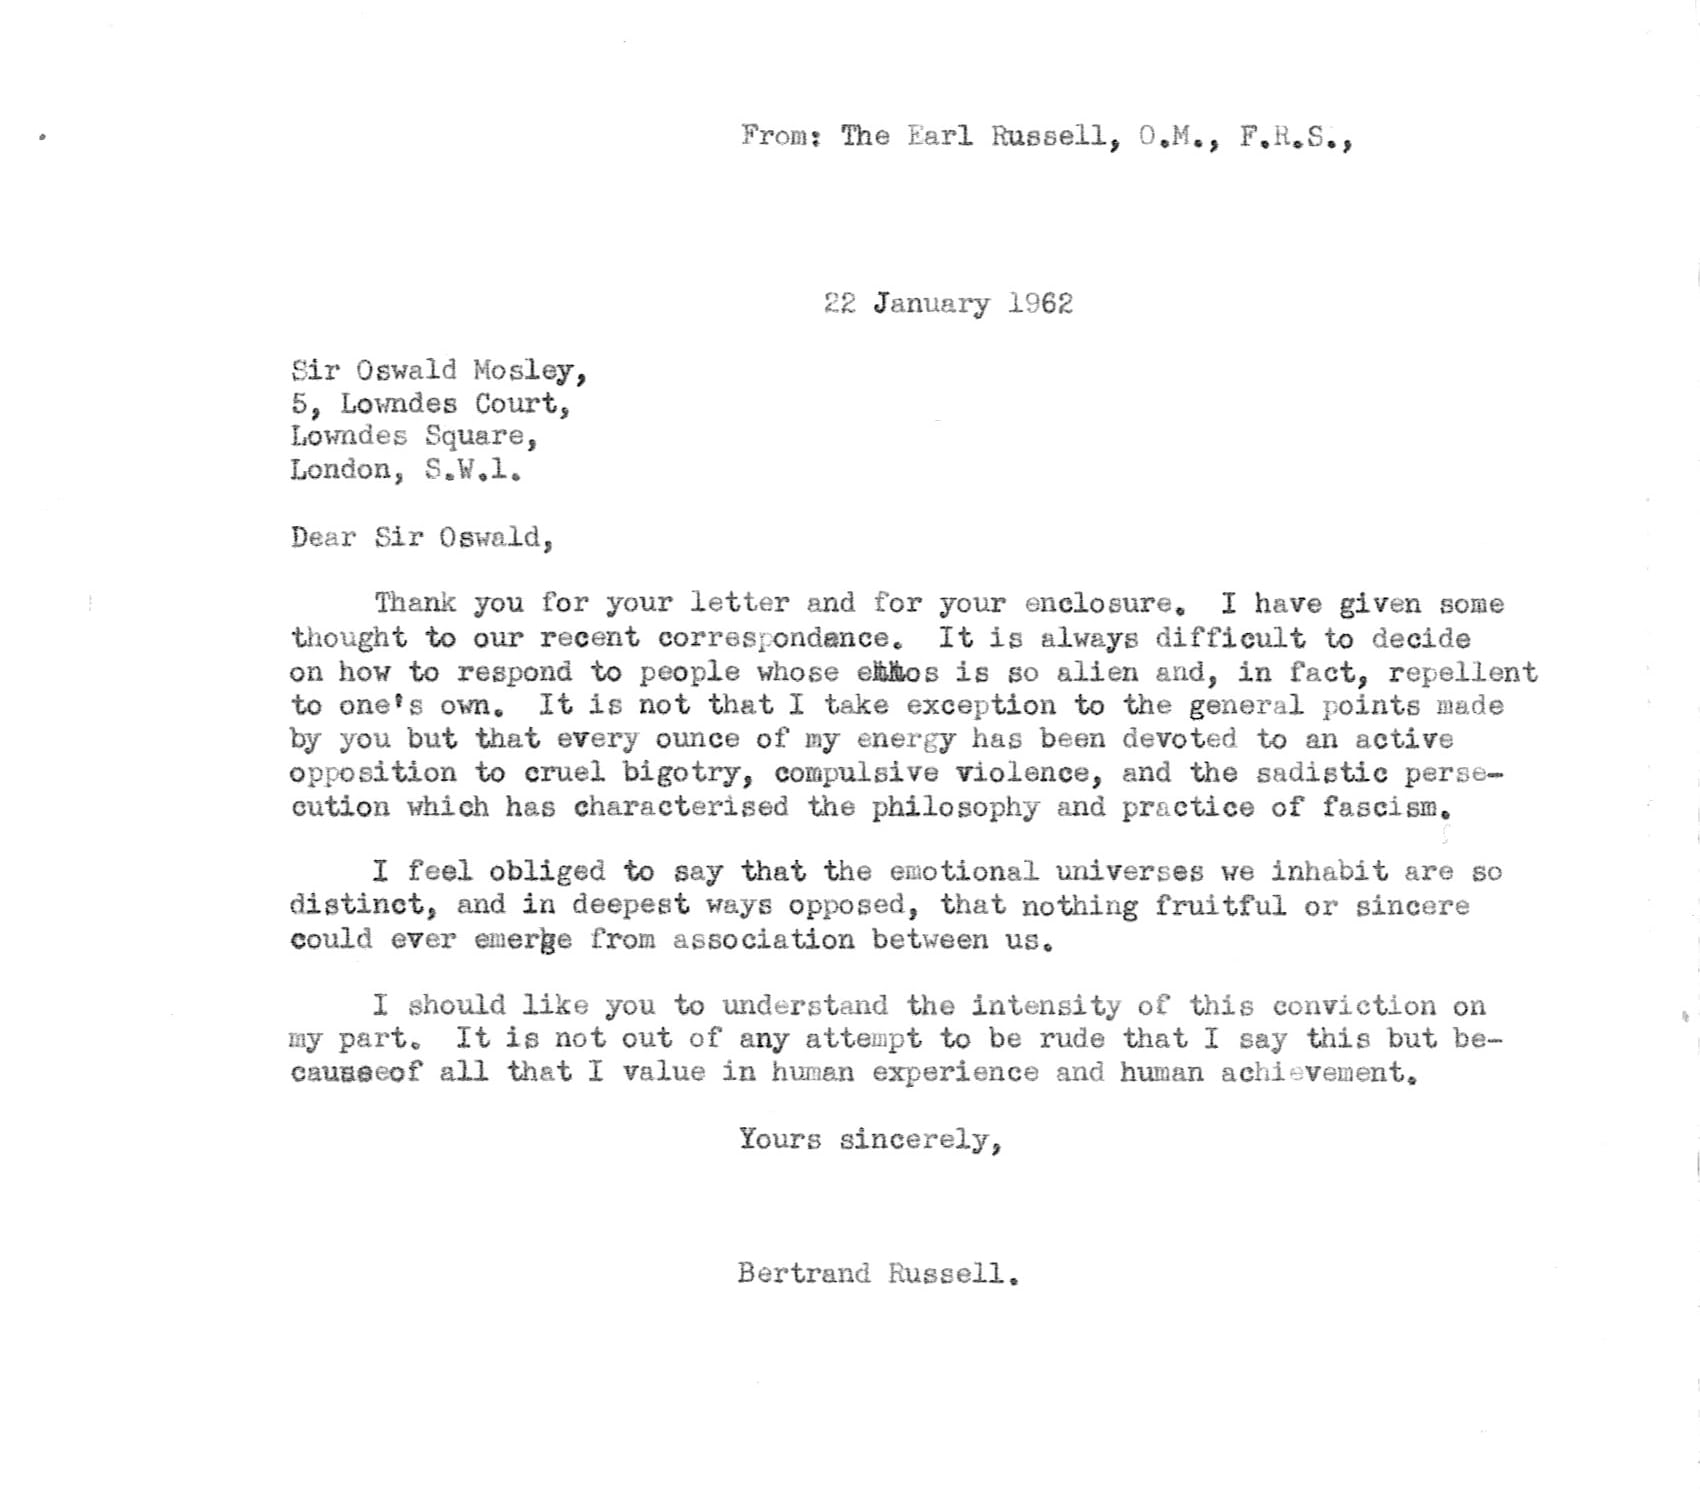 Bertrand Russell, one of the great intellectuals of his generation, was known by most as the founder of analytic philosophy, but he was actually a man of many talents: a pioneering mathematician, an accomplished logician, a tireless activist, a respected historian, and a Nobel Prize-winning writer. When he wrote this letter at the beginning of 1962, Russell was 89 years old and clearly still a man of morals who stood firm in his beliefs. Its recipient was Sir Oswald Mosley, a man most famous for founding, in 1932, the British Union of Fascists. Photograph: The Bertrand Russell Archives, McMaster University Library